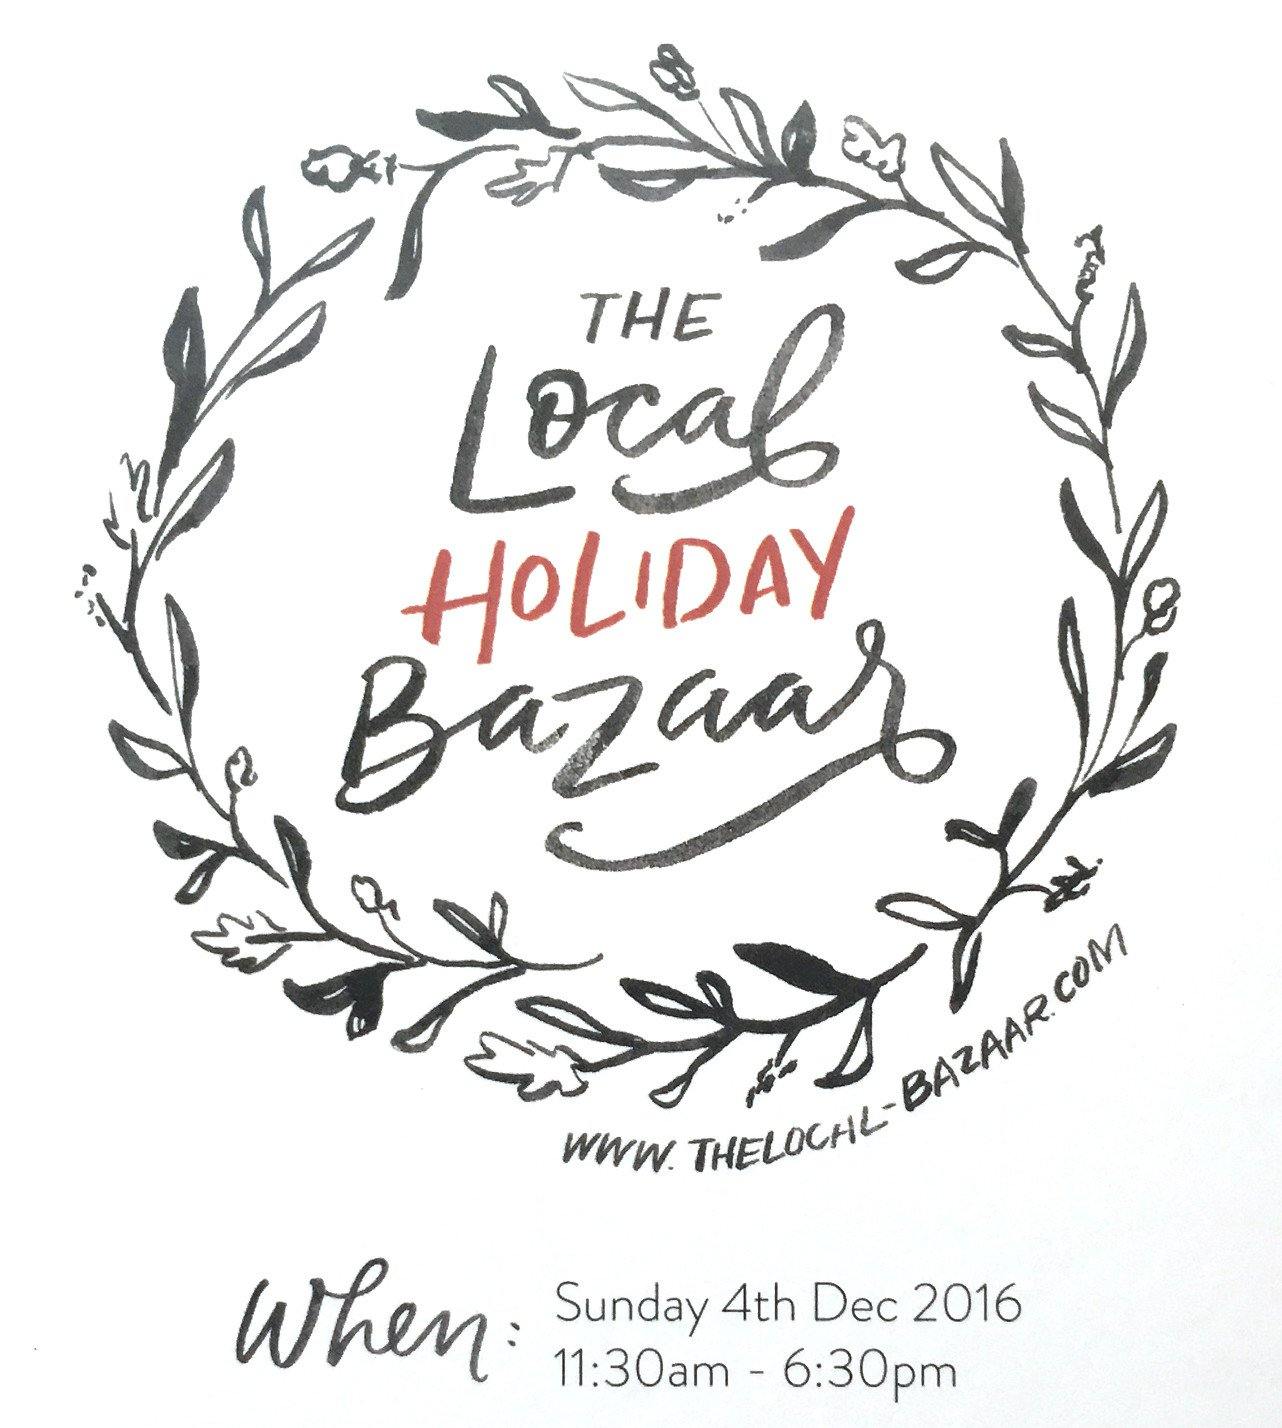 The Local Holiday Bazaar - The Oblong Box Shop